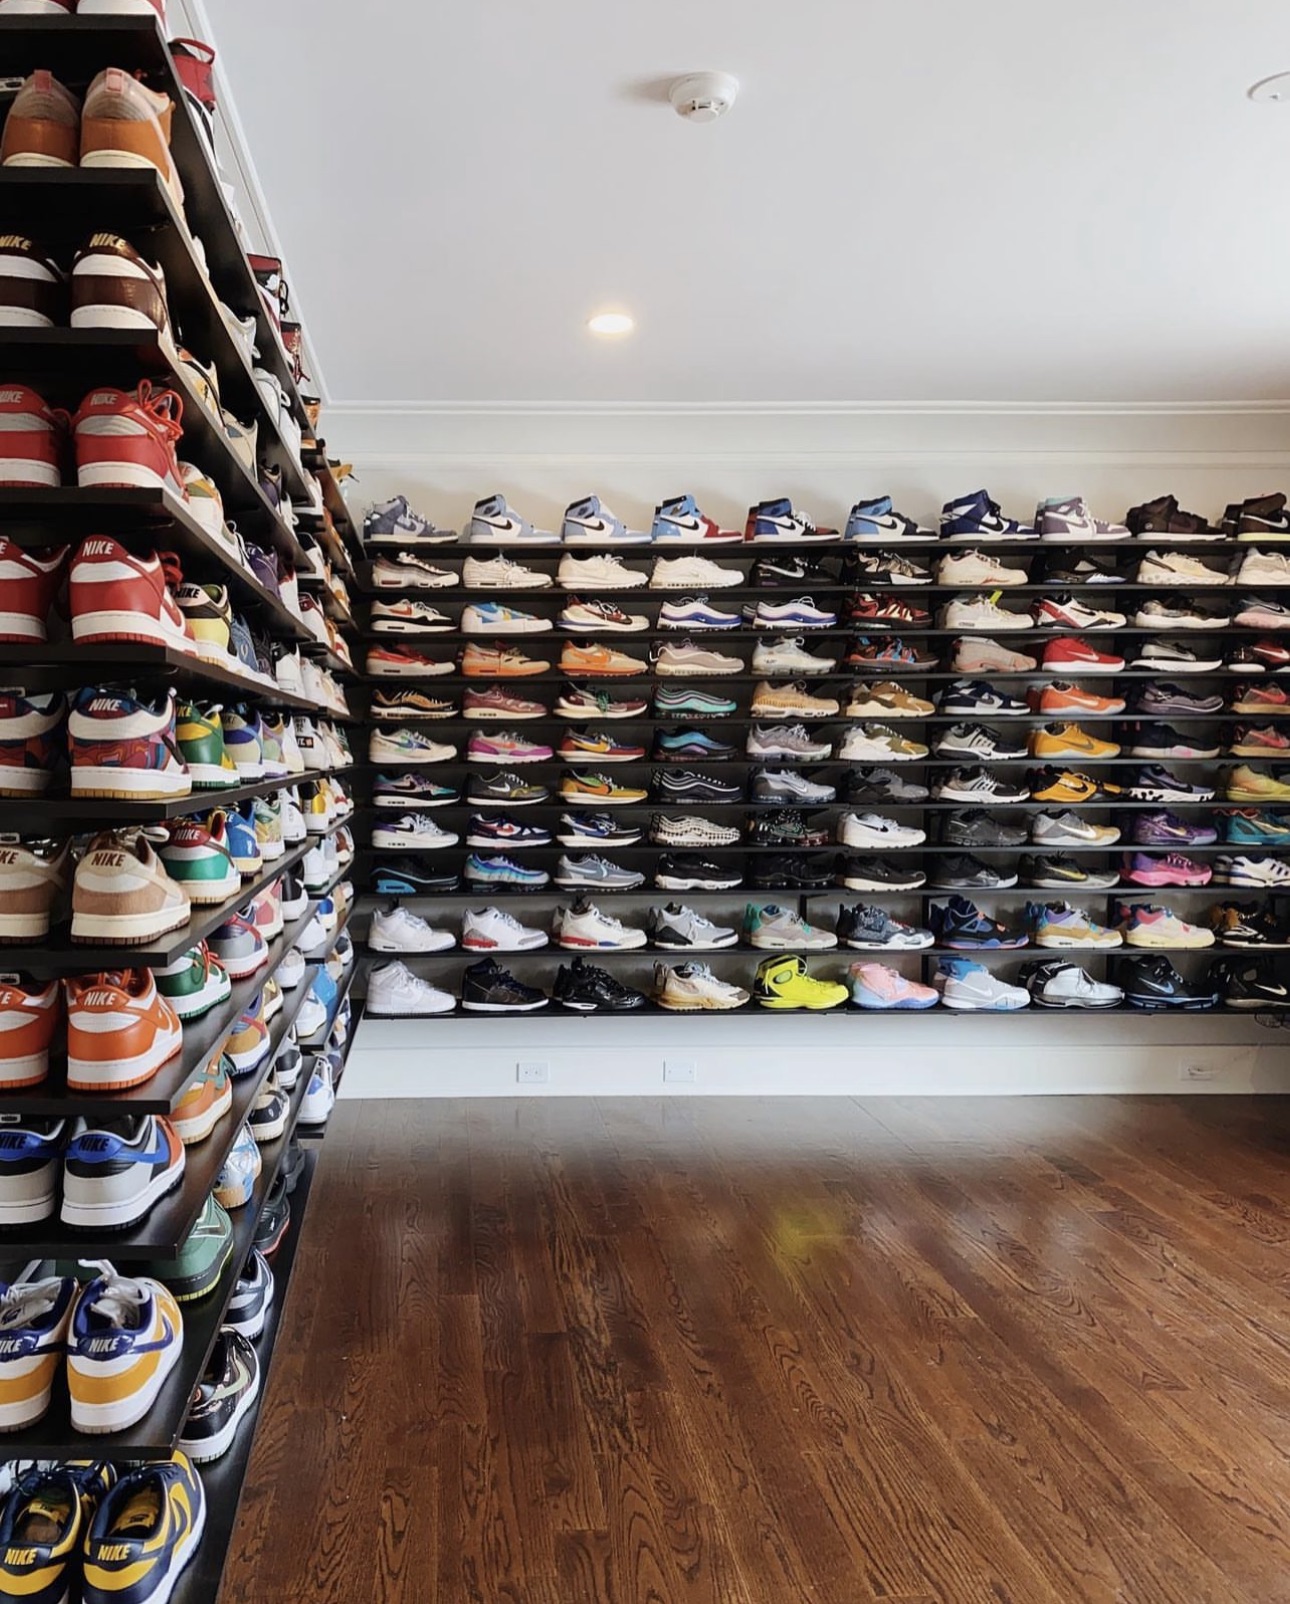 Organized wall of shoes presented on display shelves